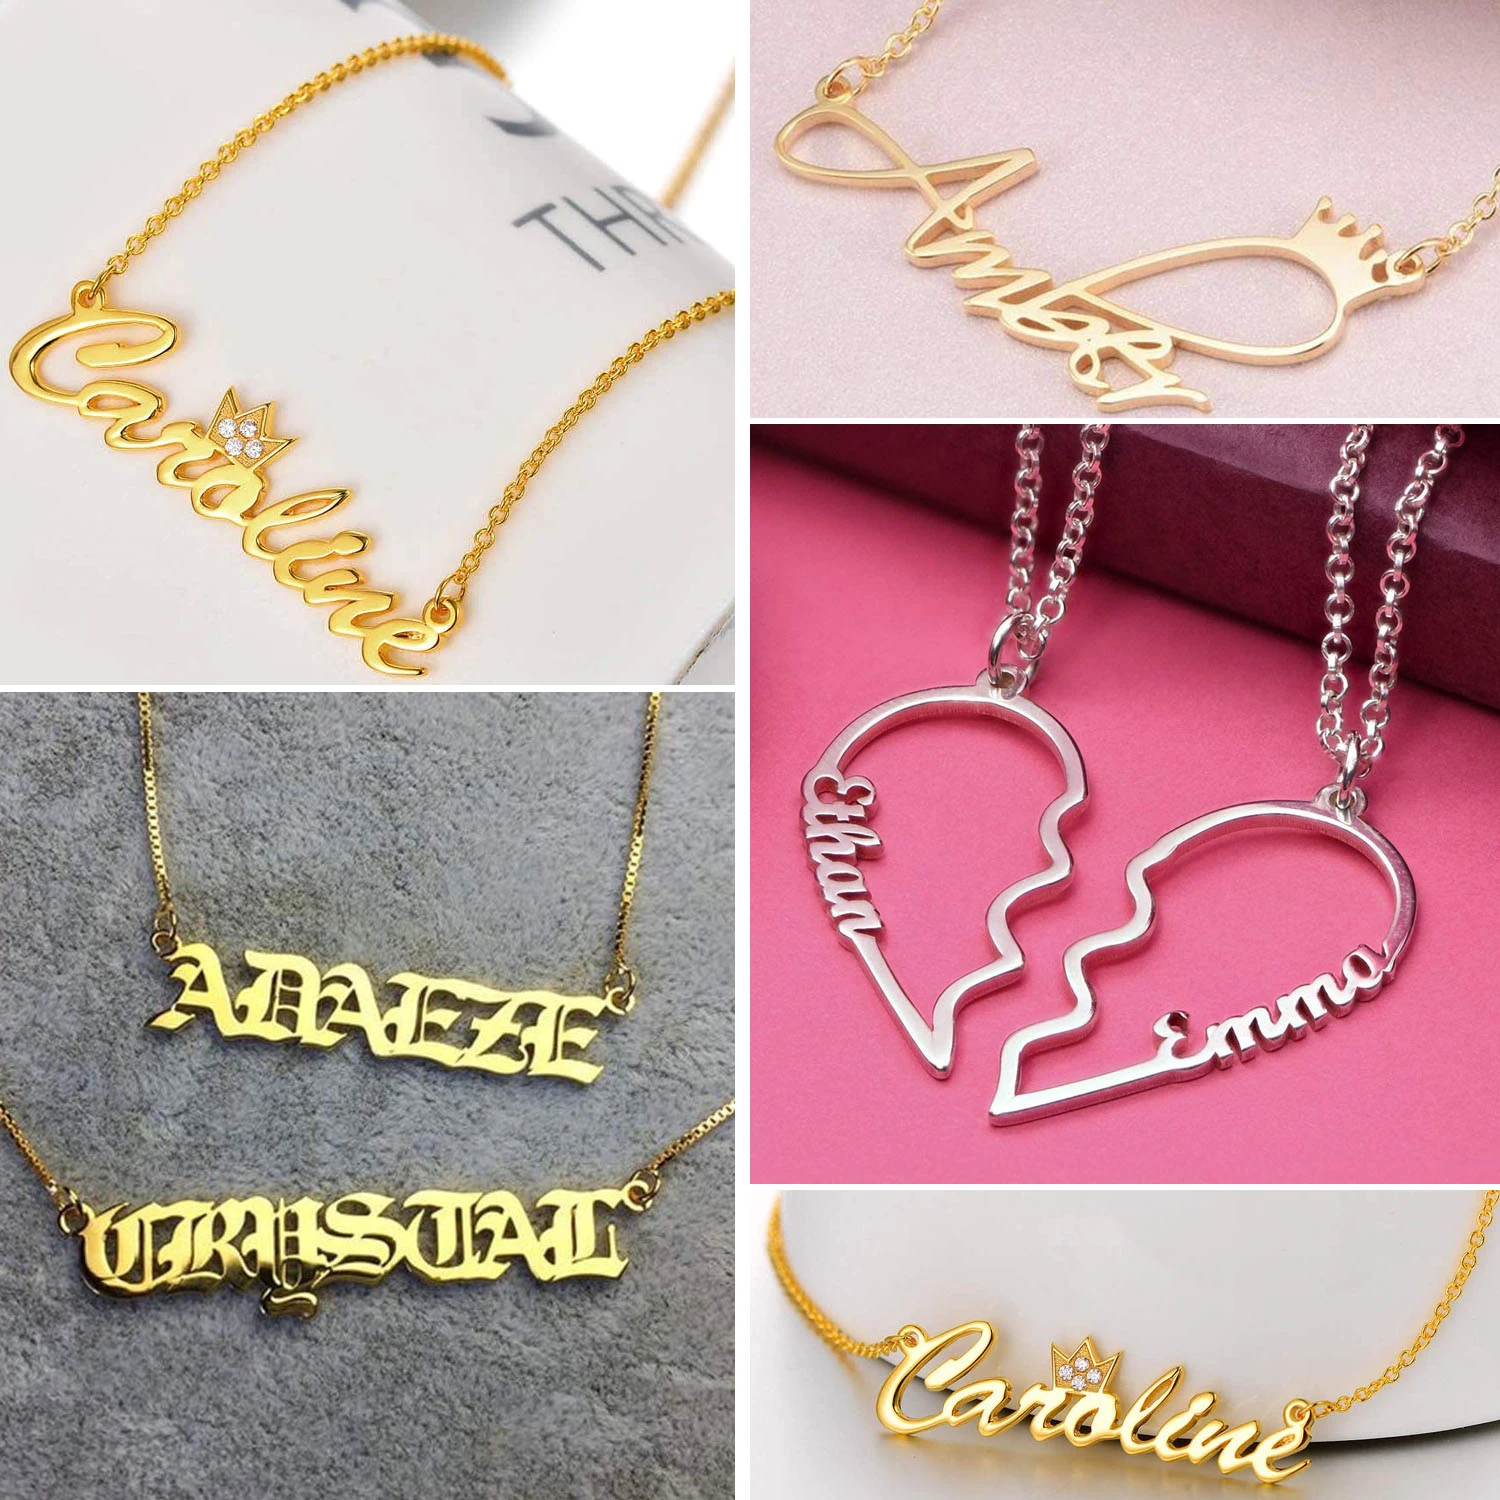 2021 fashion wholesale jewelry 3d customized jewelry gold plated pendant 925 sterling silver name plate necklace